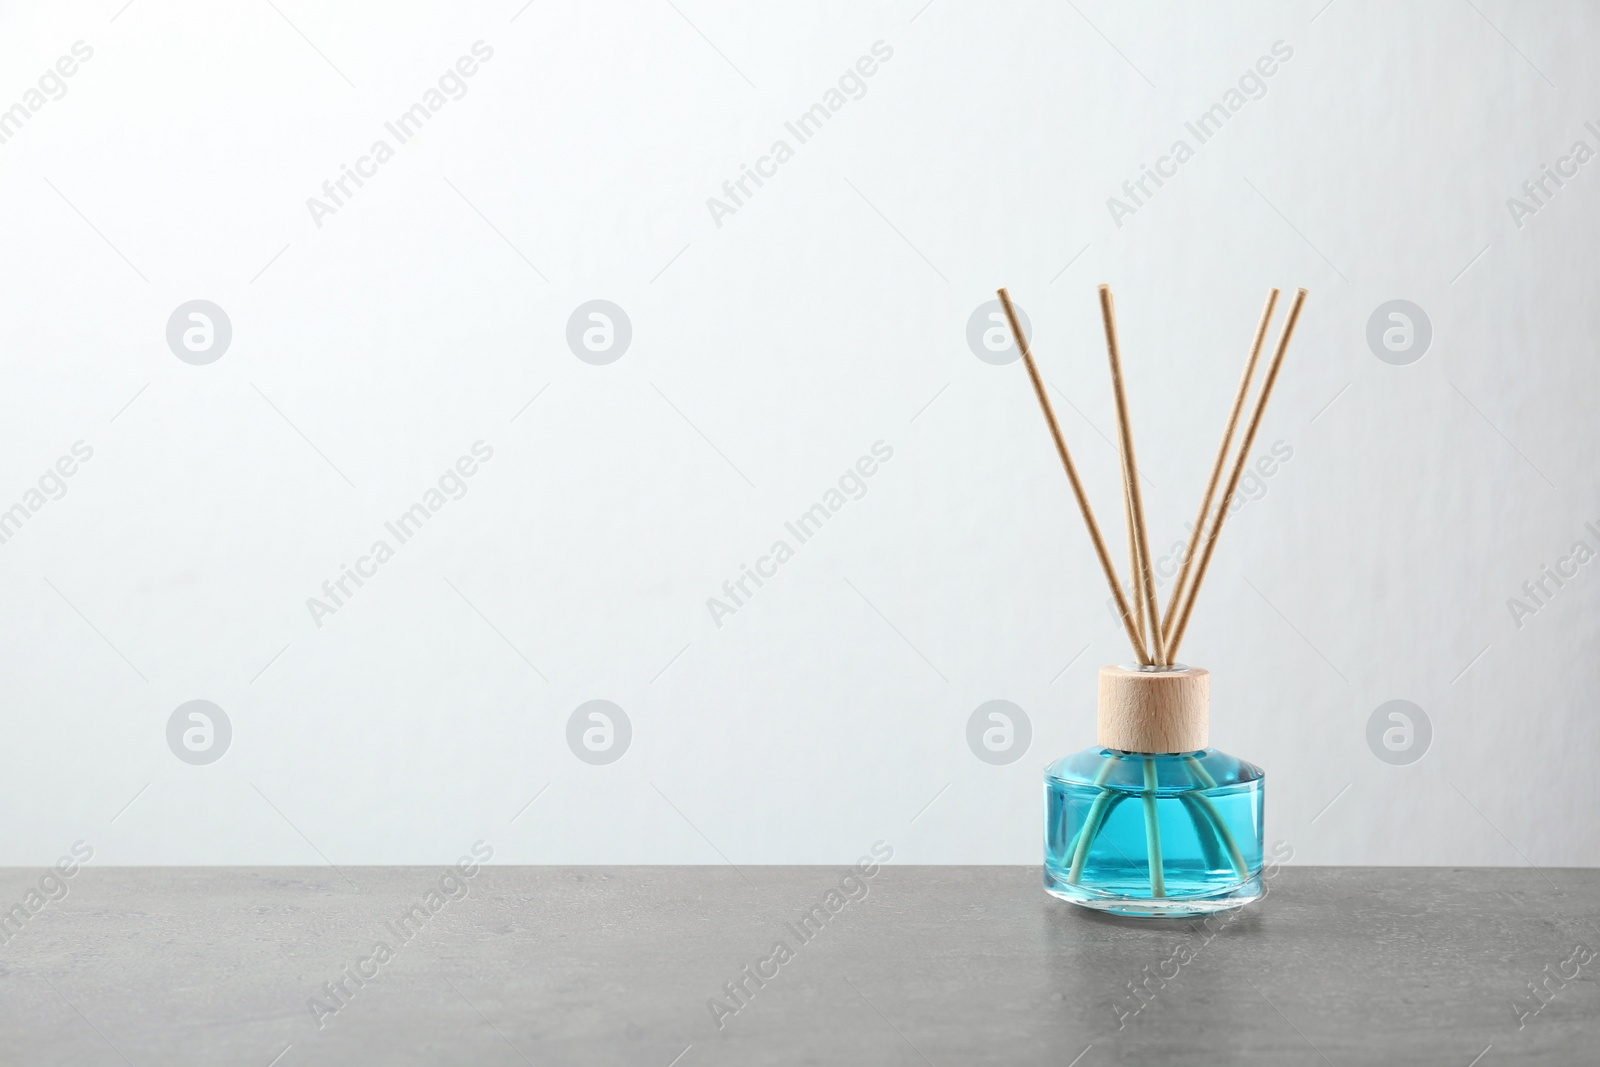 Photo of Reed air freshener on grey table against white background, space for text